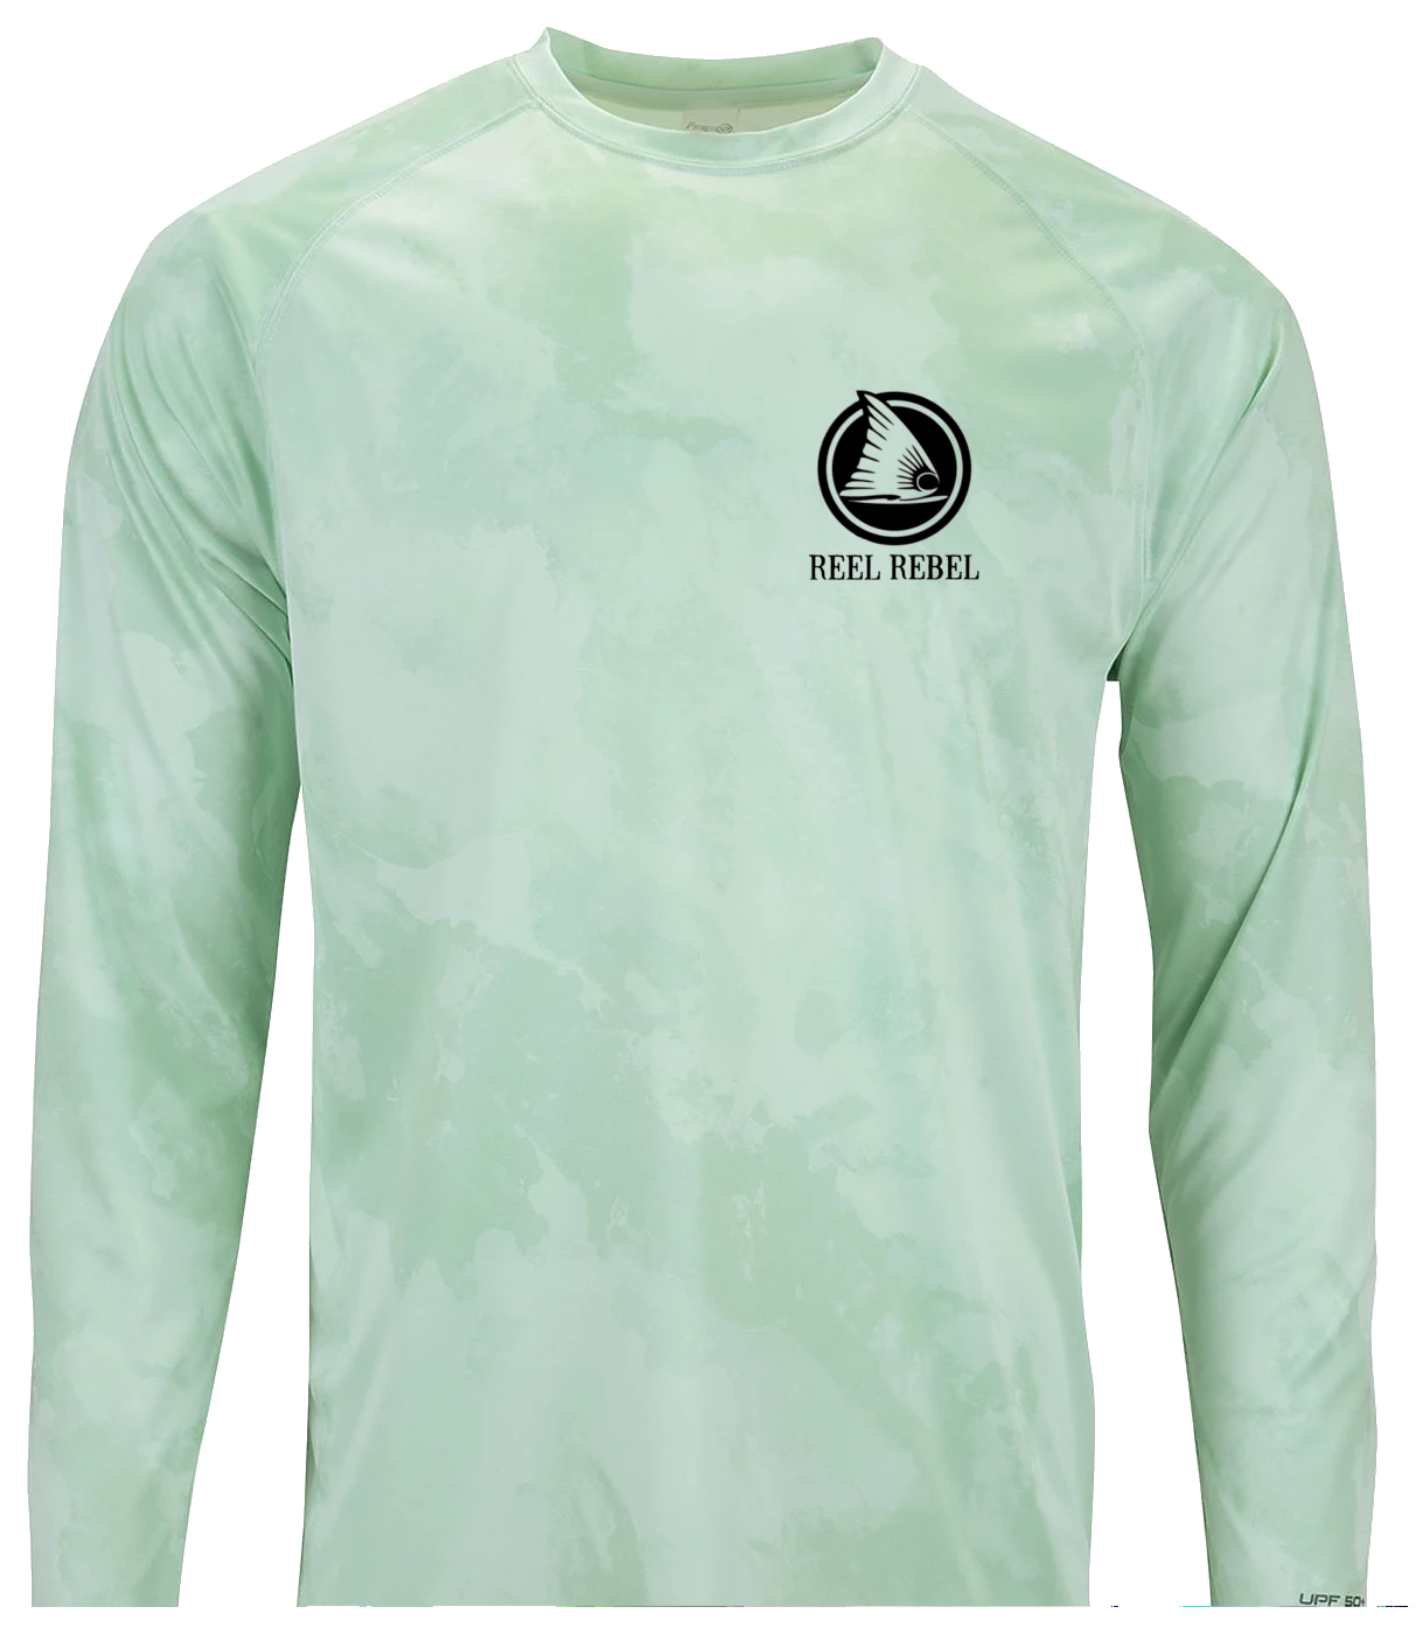 Radyan High Visibility Force Color Long Sleeve Safety T-Shirts, UPF 50+ UV  